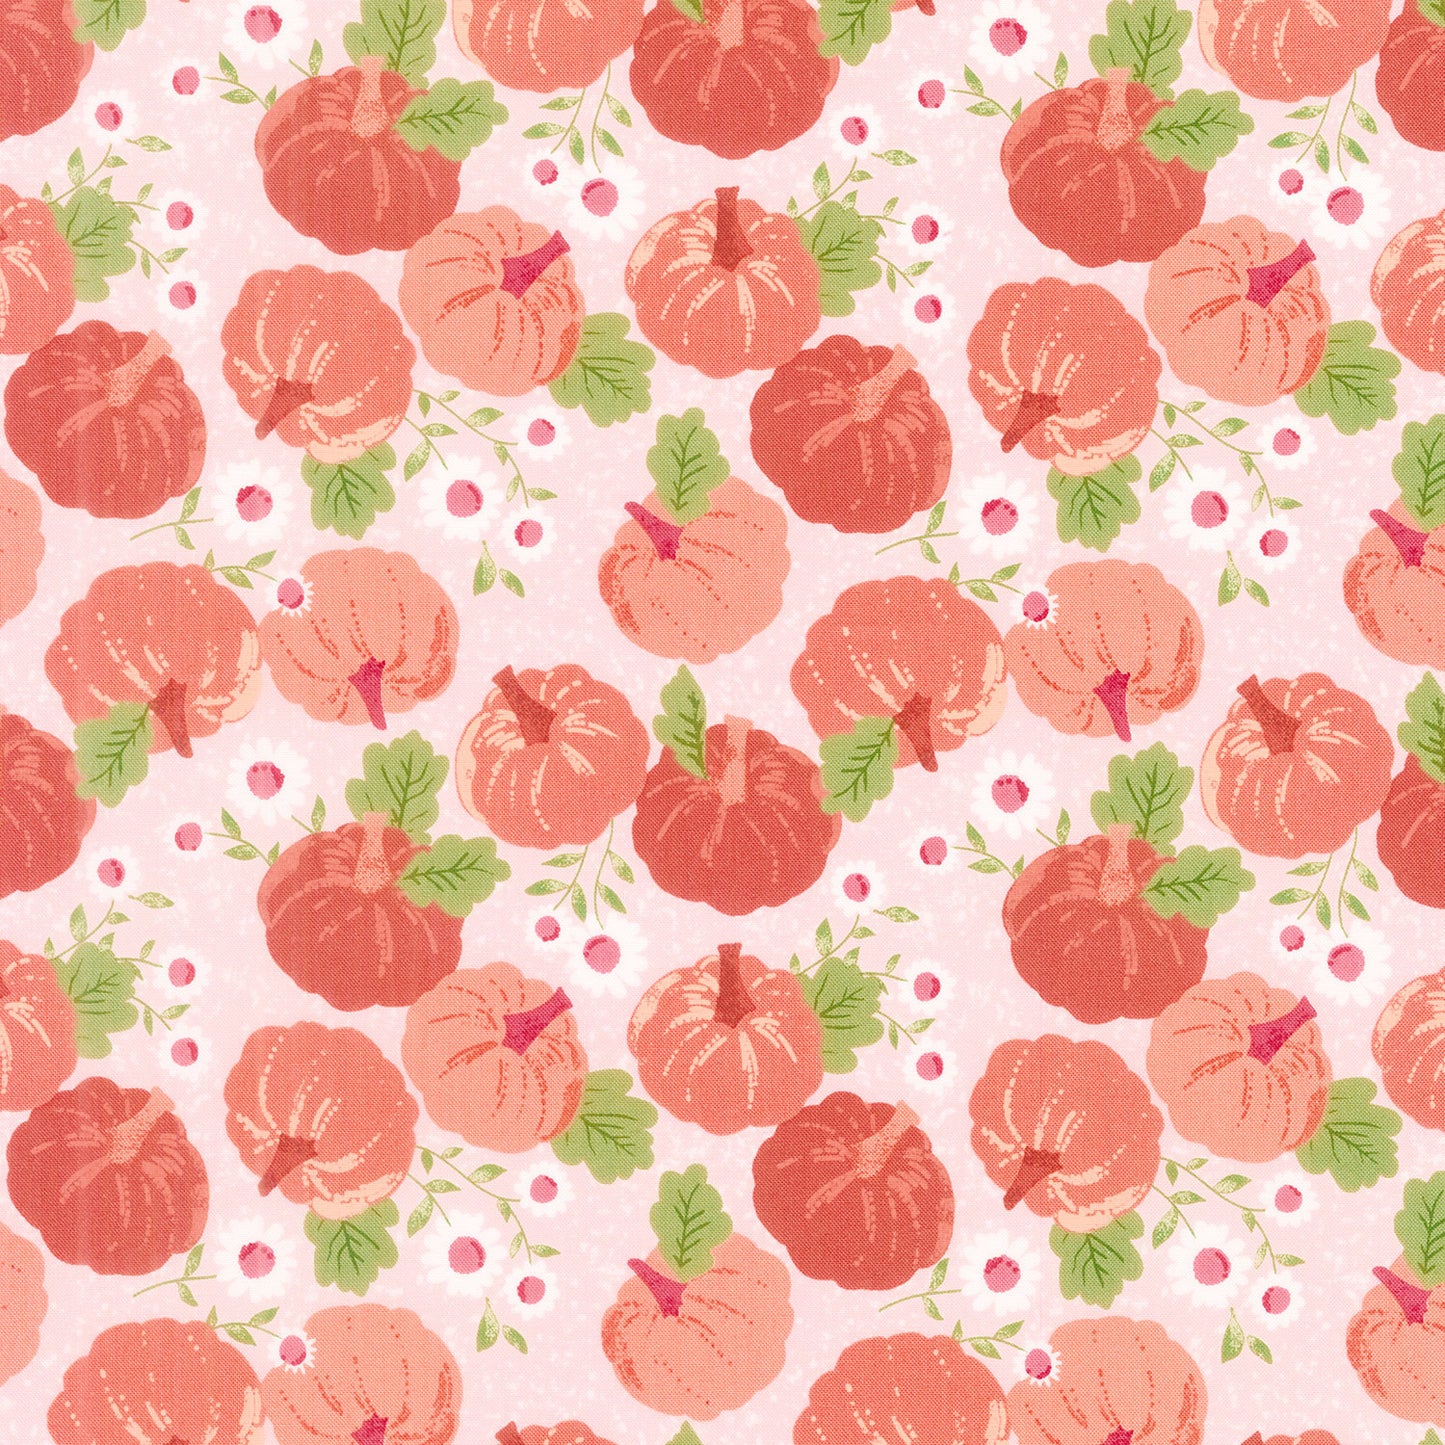 Hey Boo - Pumpkin Patch Bubble Gum Pink Yardage Primary Image